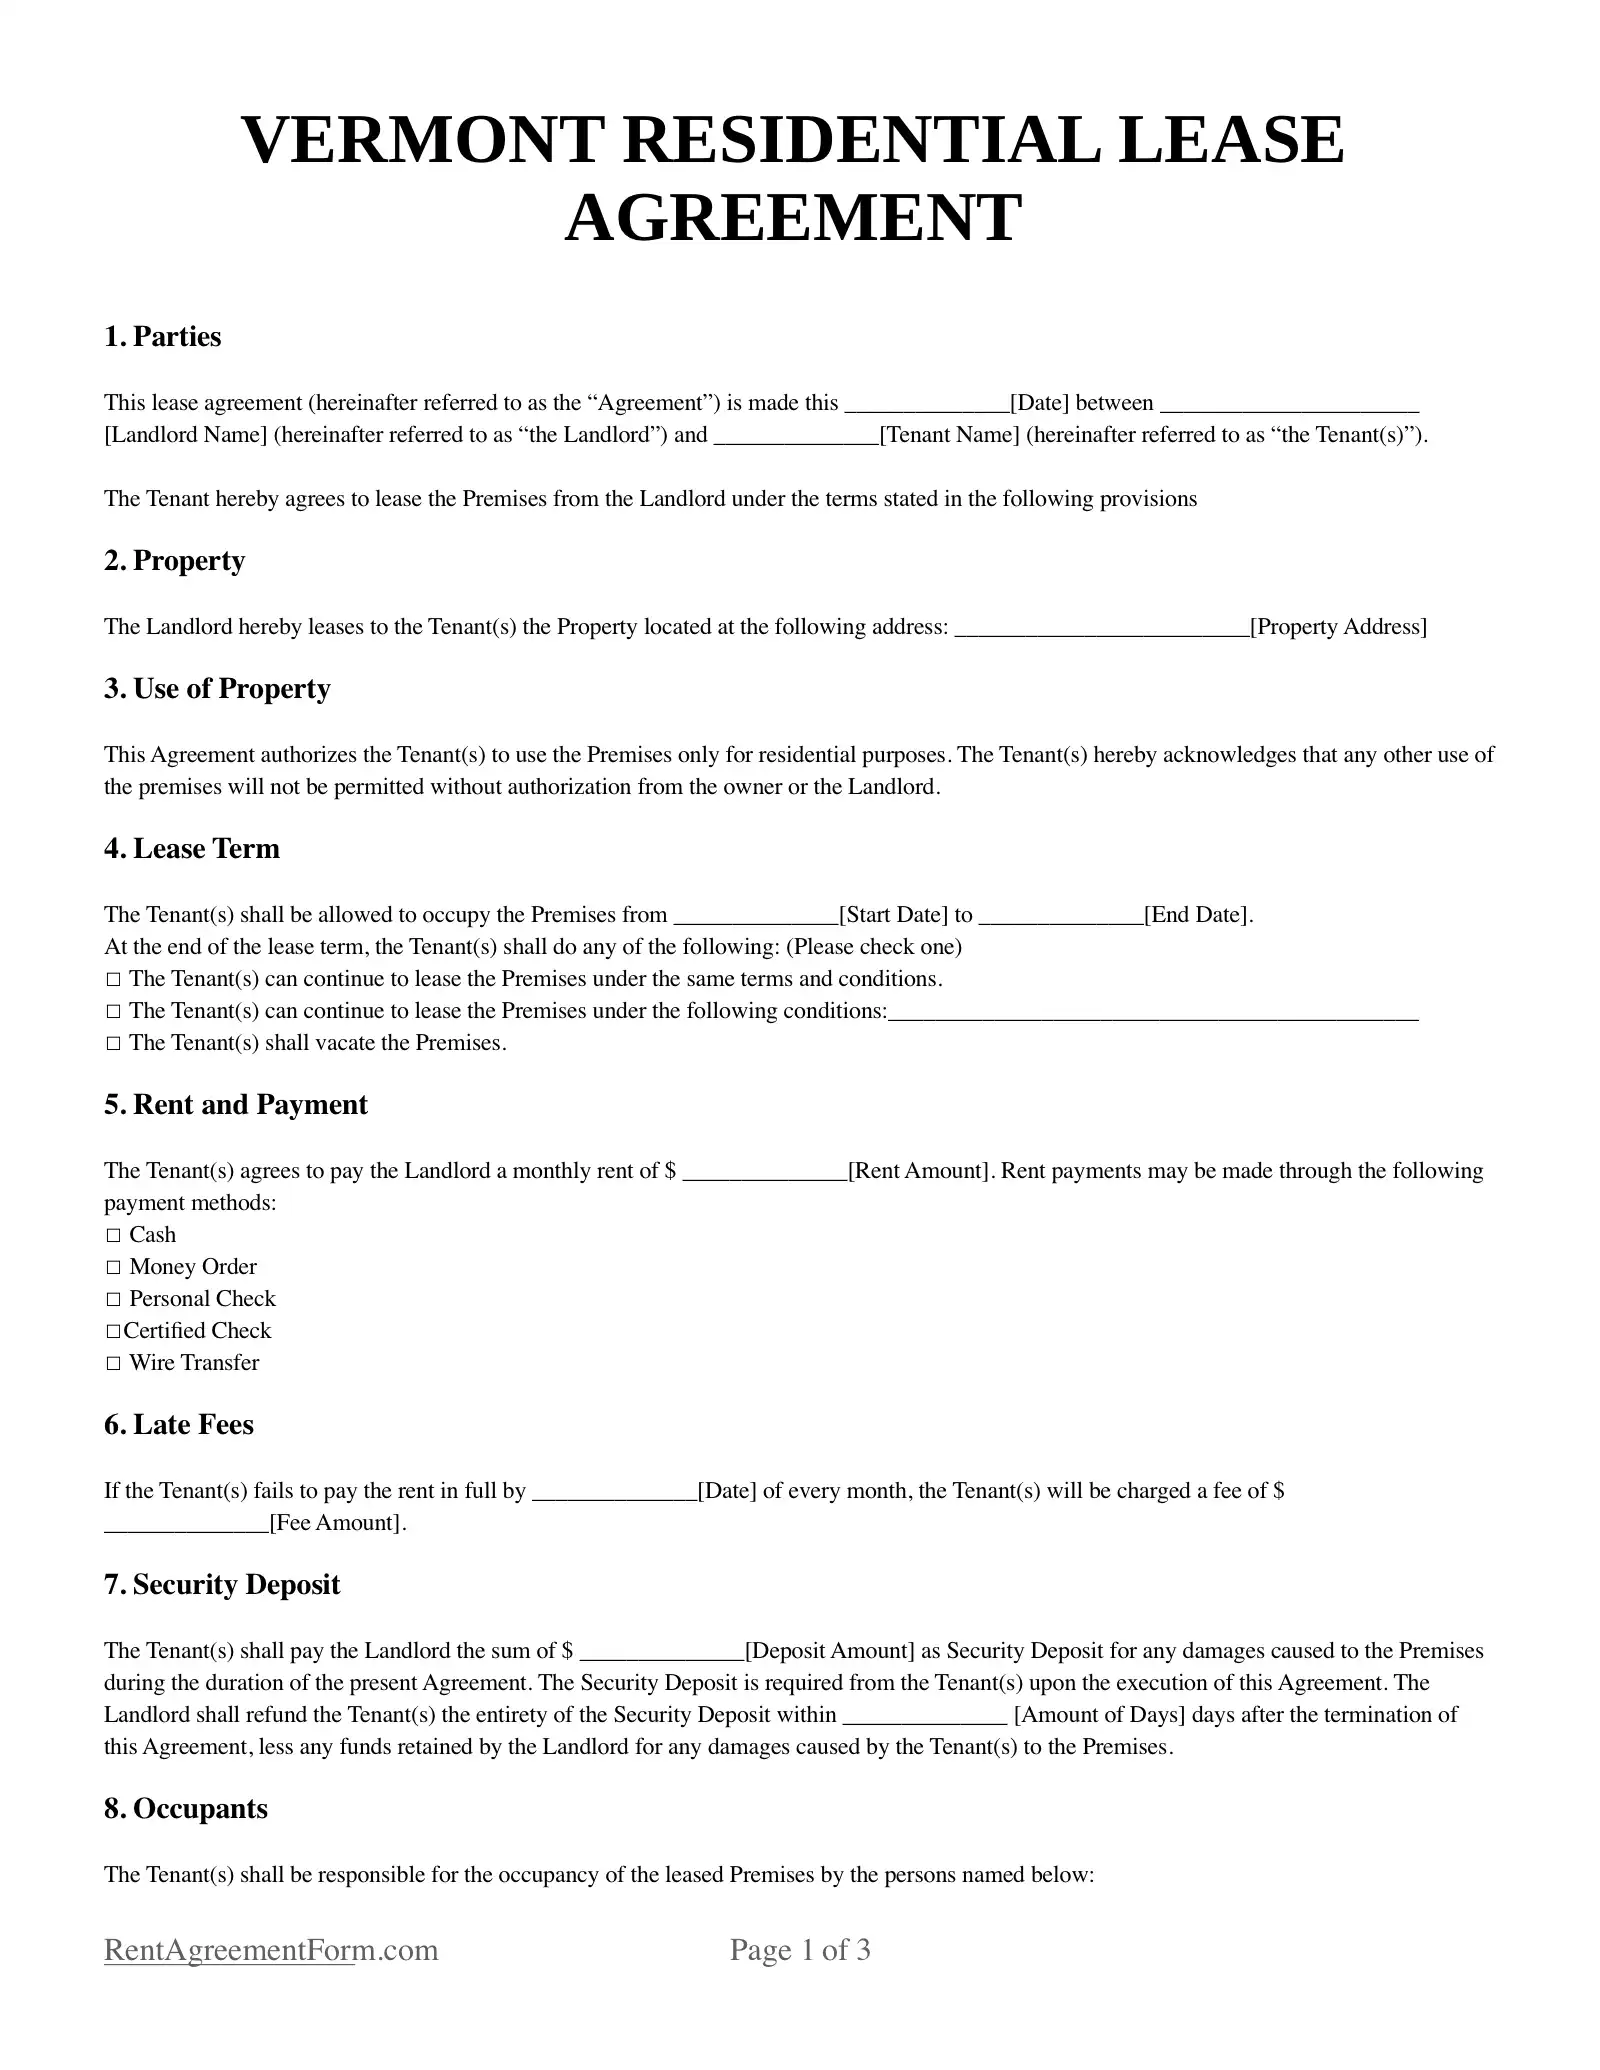 Vermont Residential Lease Agreement Sample